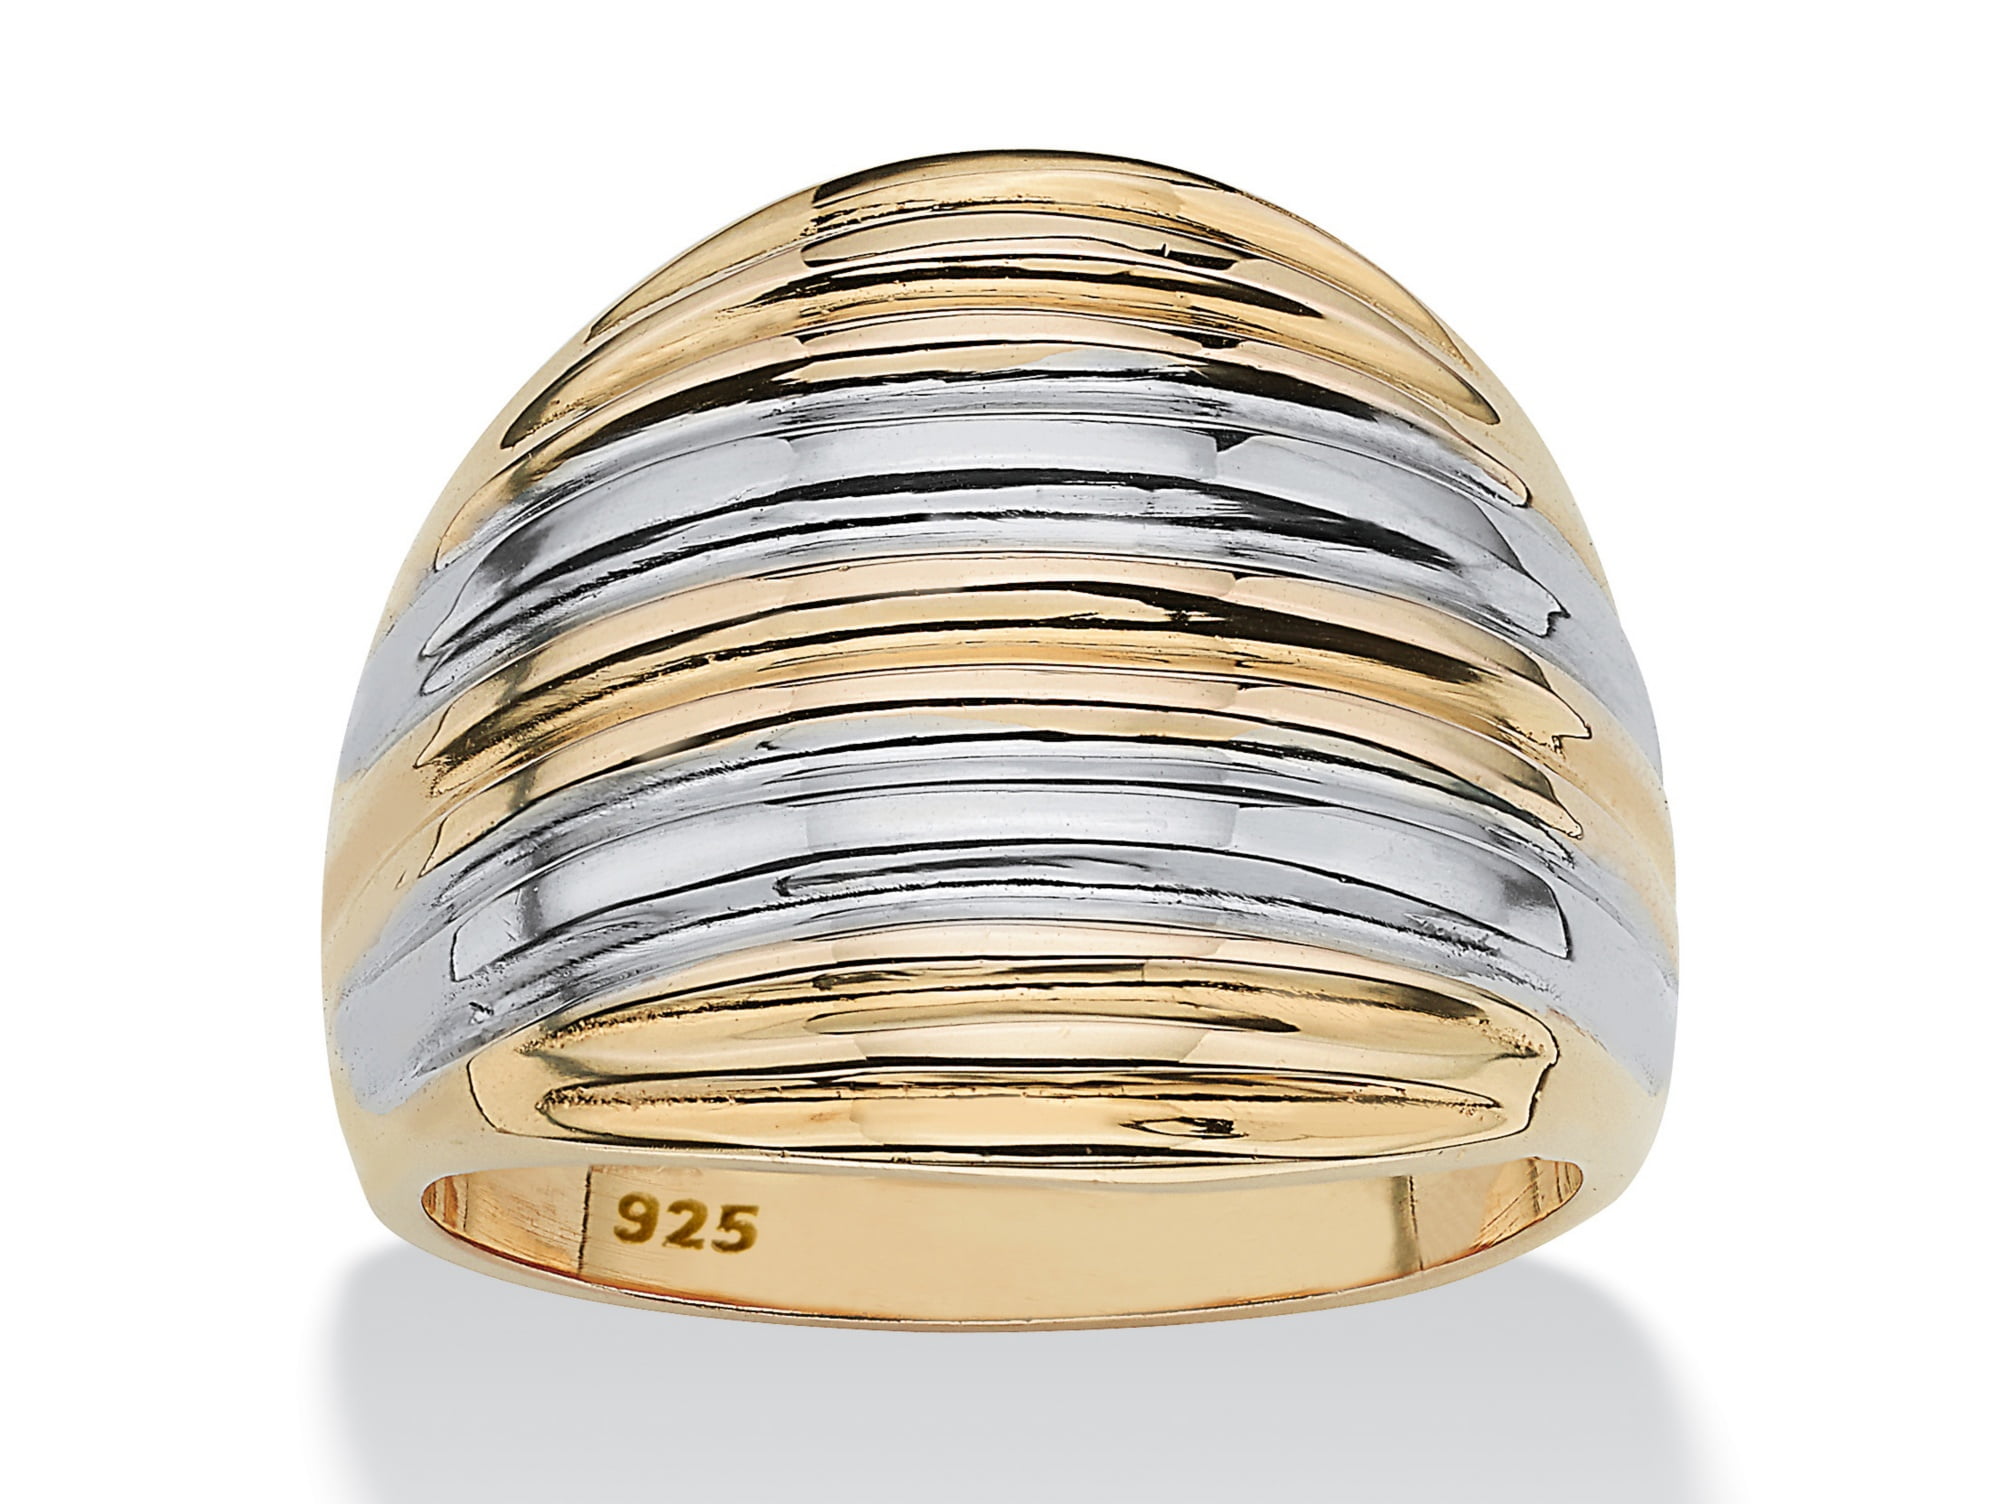 Palmbeach Jewelry 18k Gold Over Sterling Silver Two Tone Dome Ring